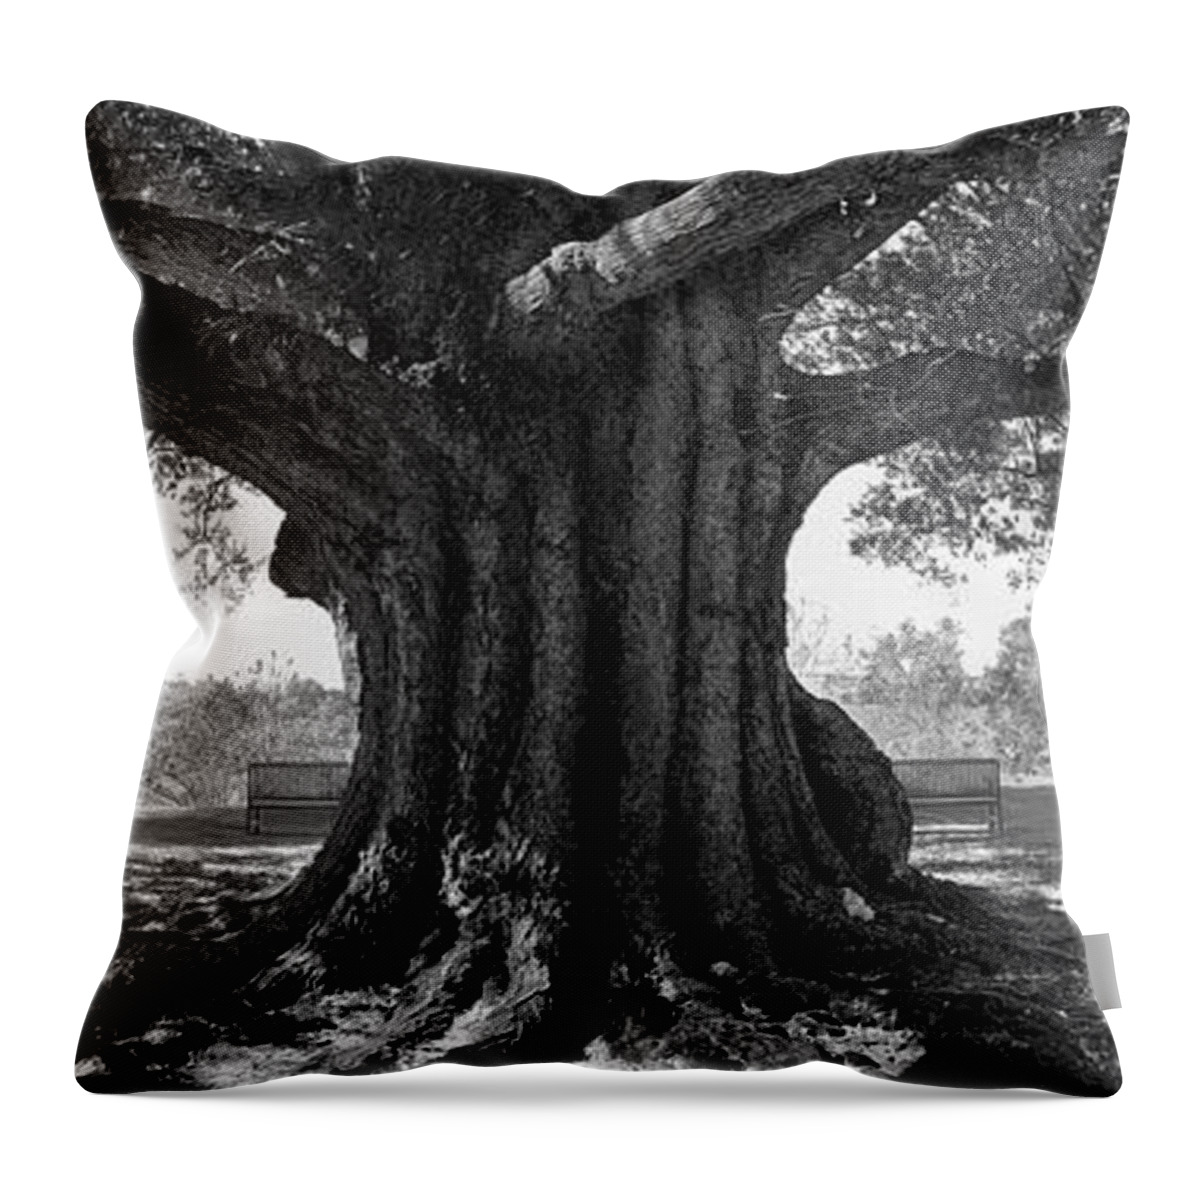 Shade Tree Throw Pillow featuring the photograph Shade Tree B W by Mike McGlothlen